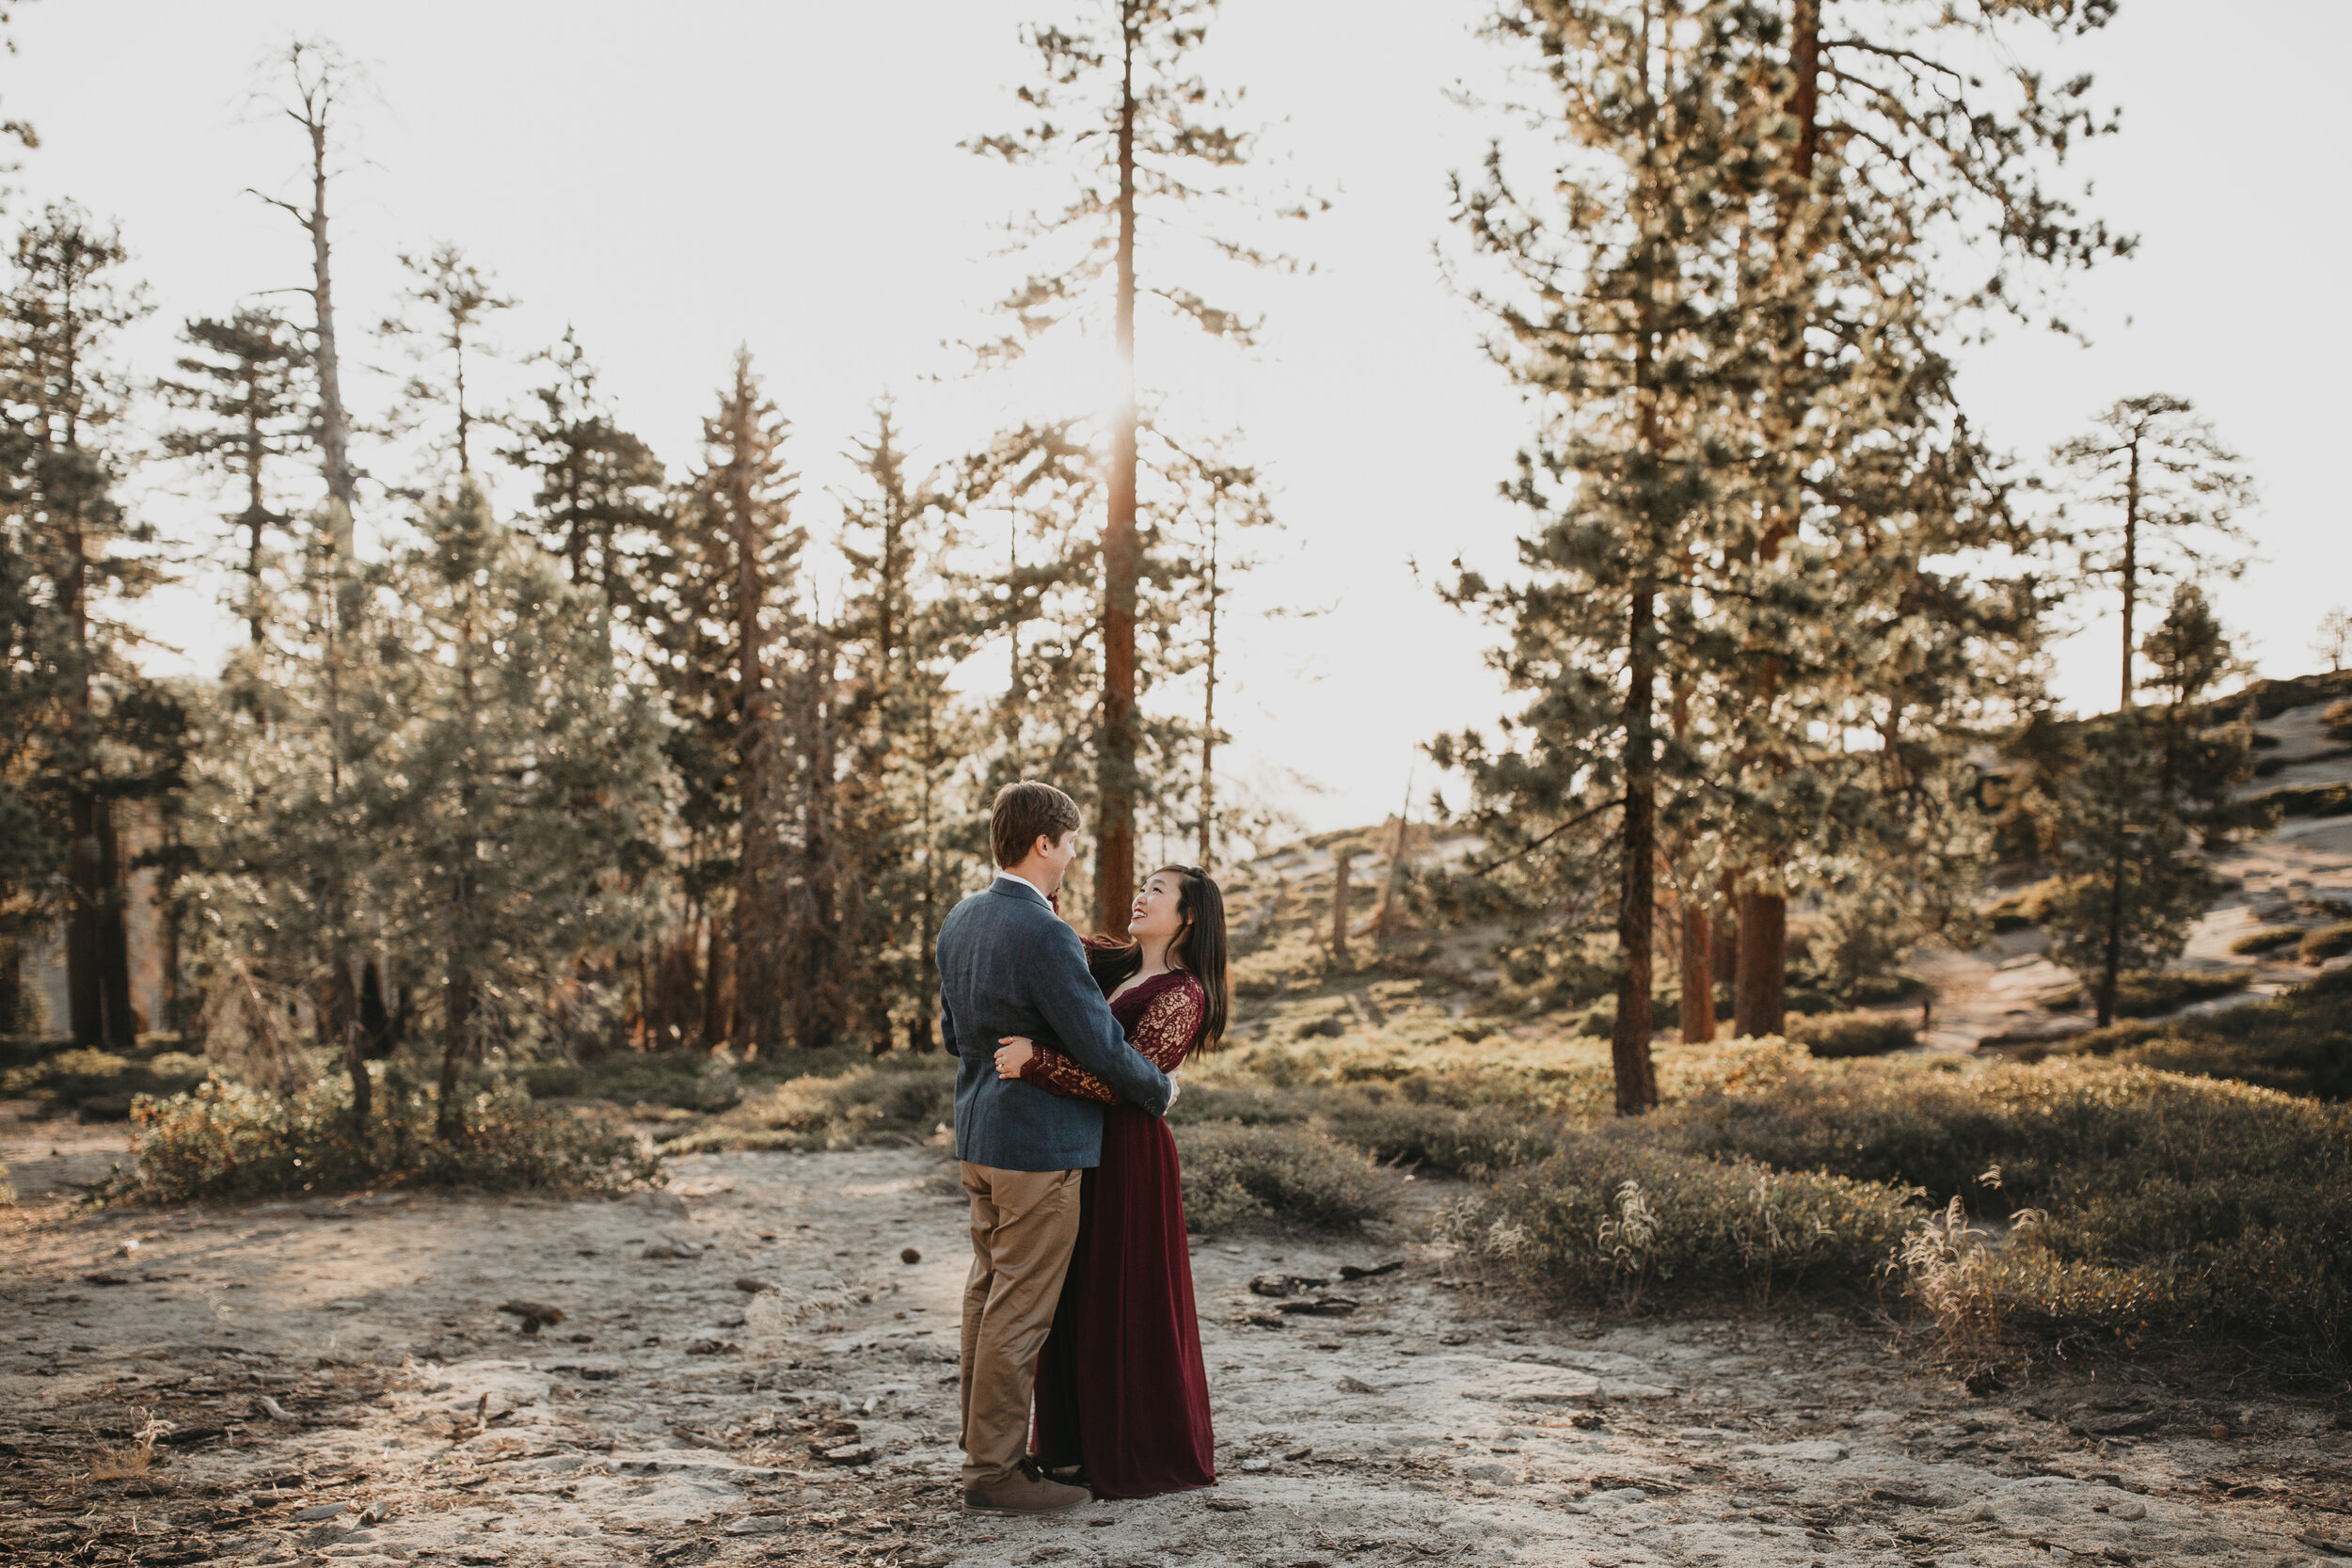 yosemite-national-park-couples-session-at-taft-point-and-yosemite-valley-yosemite-elopement-photographer-nicole-daacke-photography-120.jpg